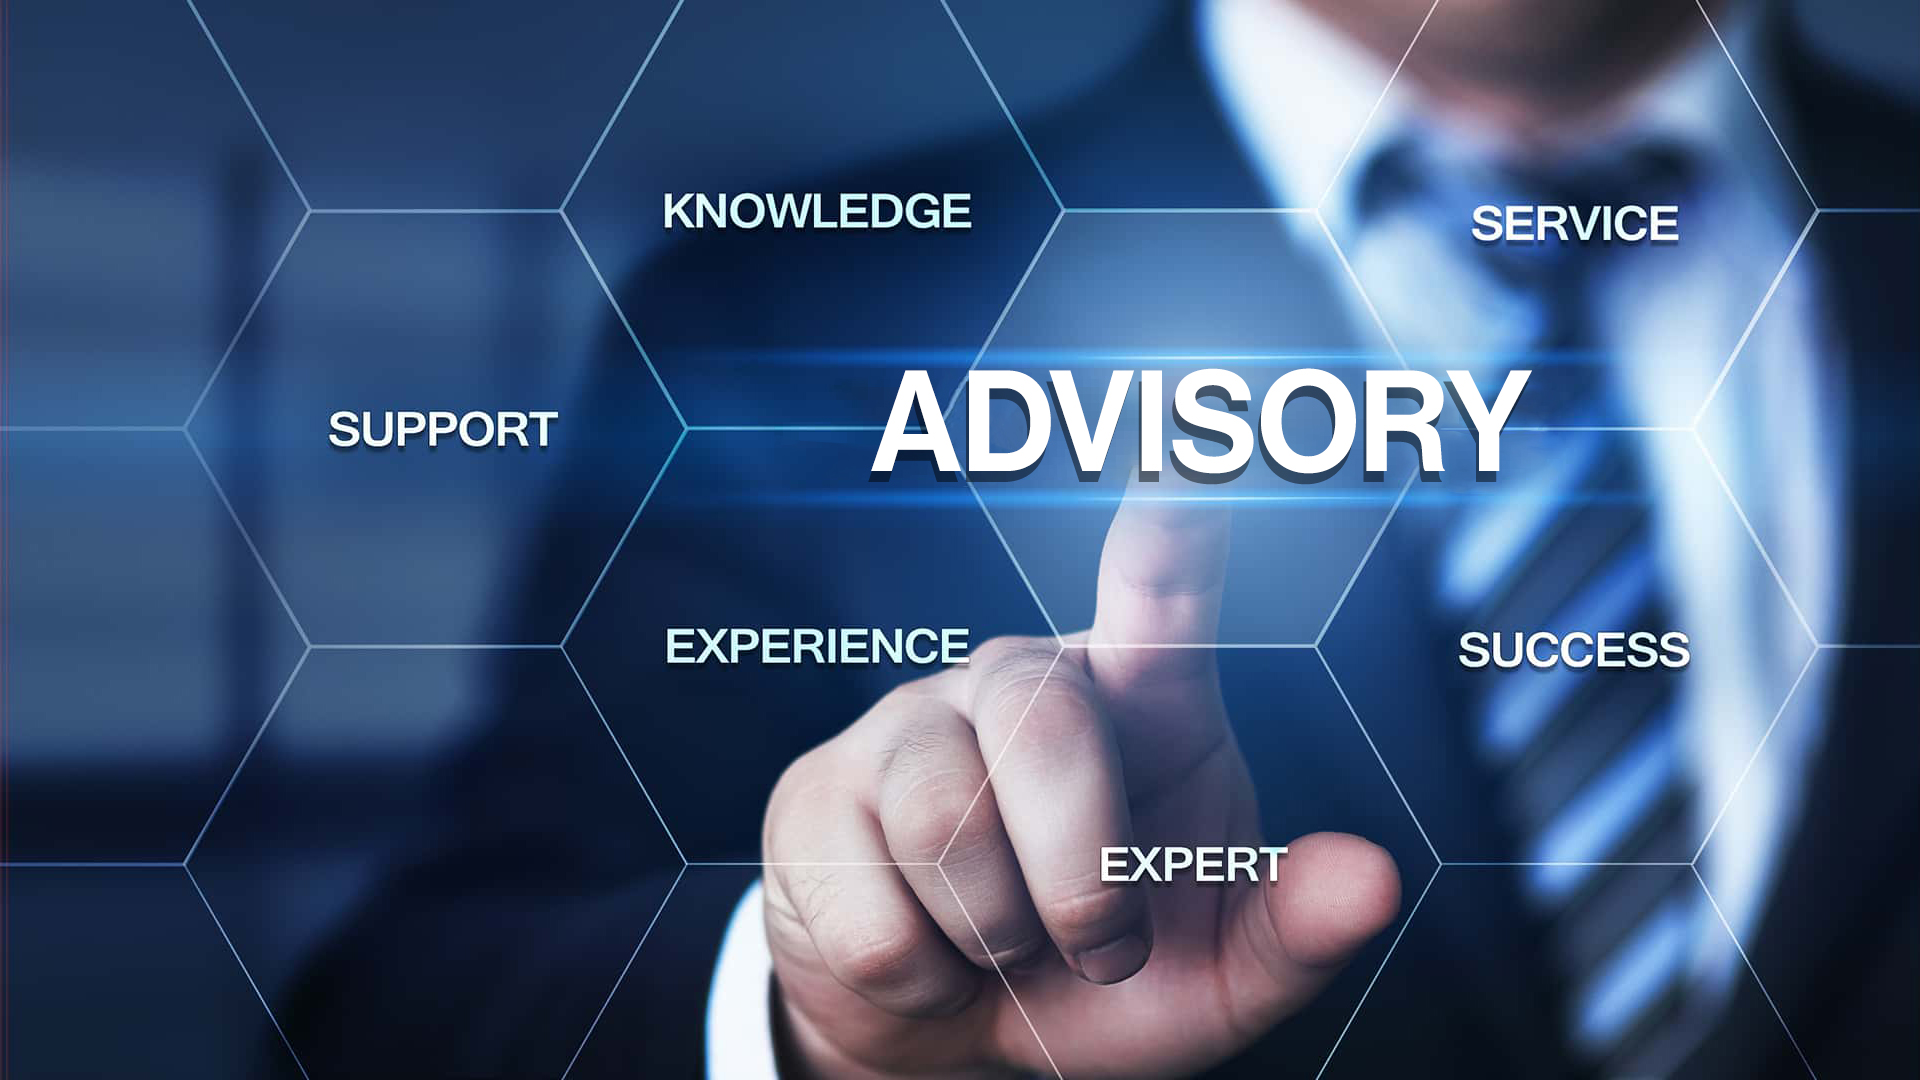 Healthcare advisor provides experience knowledge and success.